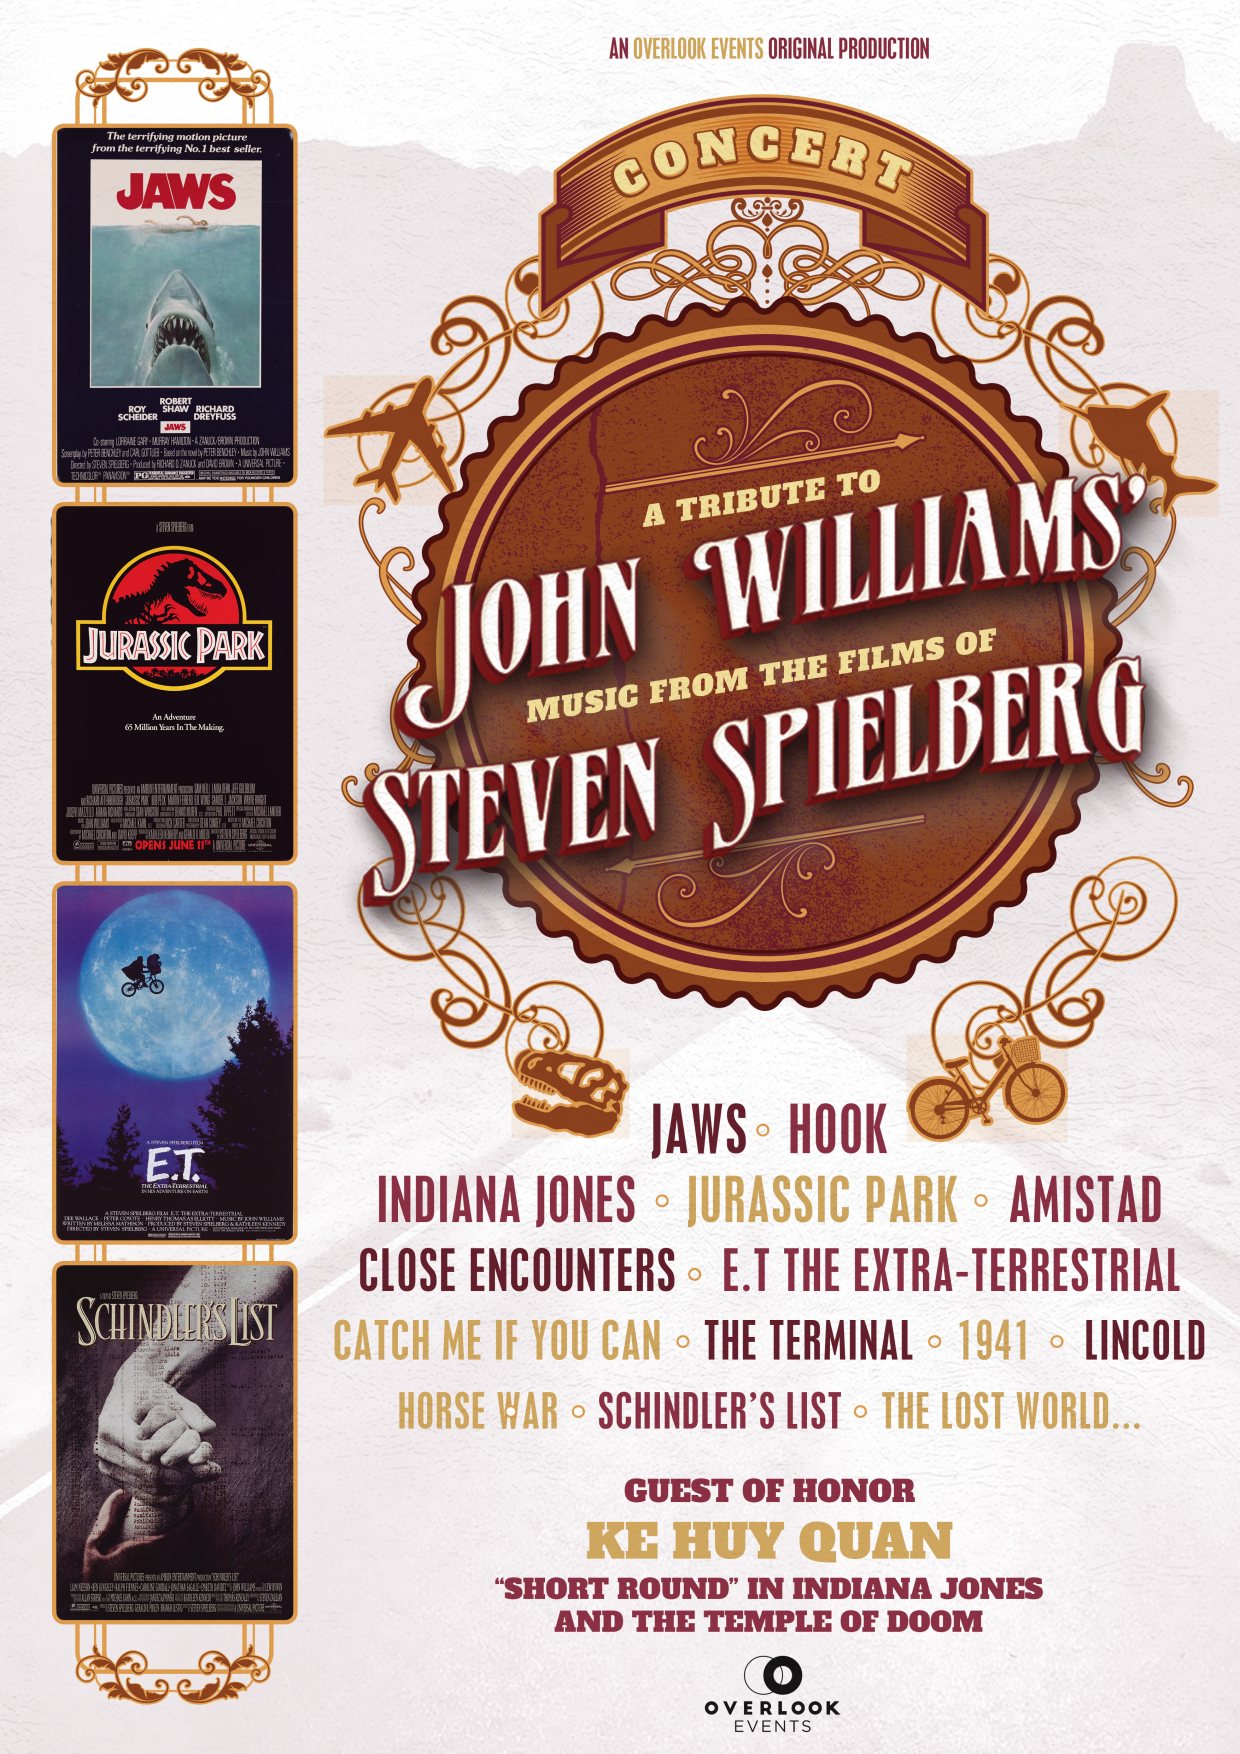 Tribute to John Williams: Music from the Films of Steven Spielberg